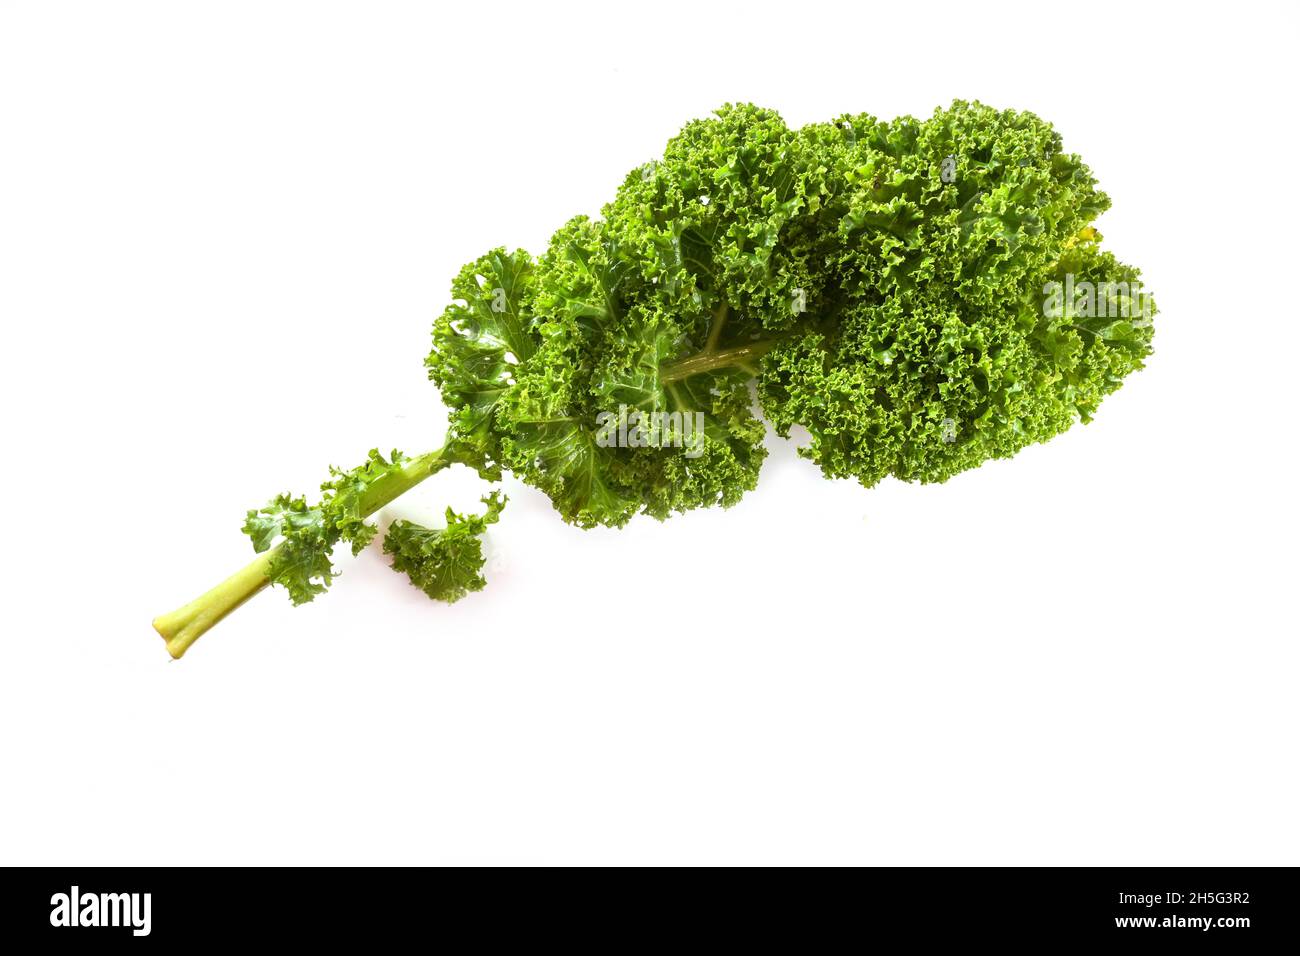 Kale or green leaf cabbage, whole curly leaf isolated on a white background, healthy winter vegetable rich in vitamins, copy space, selected focus Stock Photo